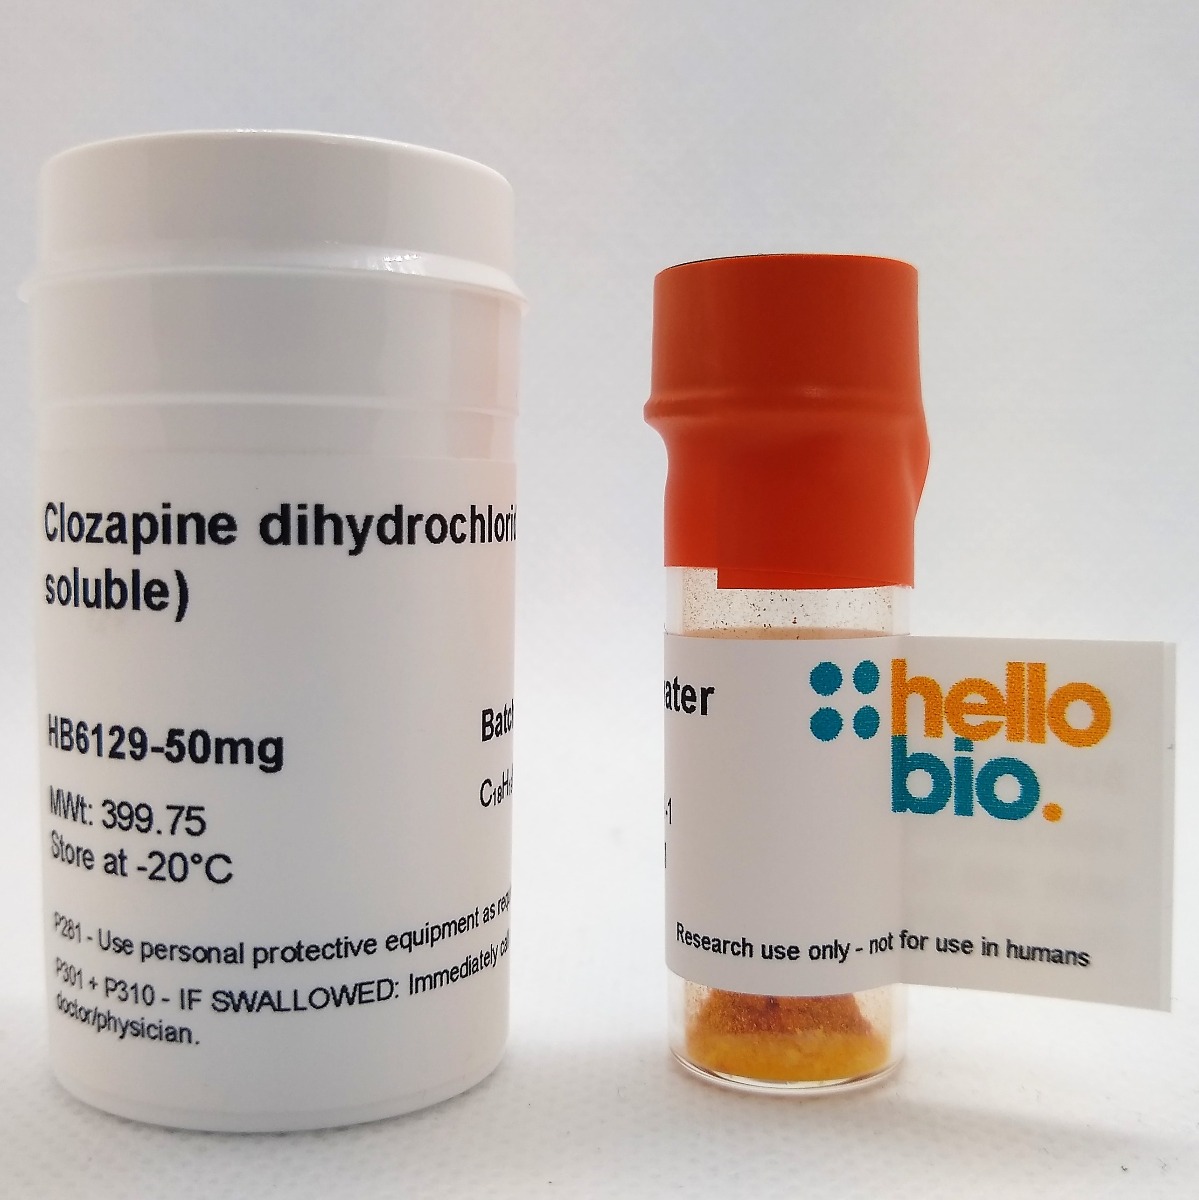 Clozapine dihydrochloride (water soluble) product vial image | Hello Bio